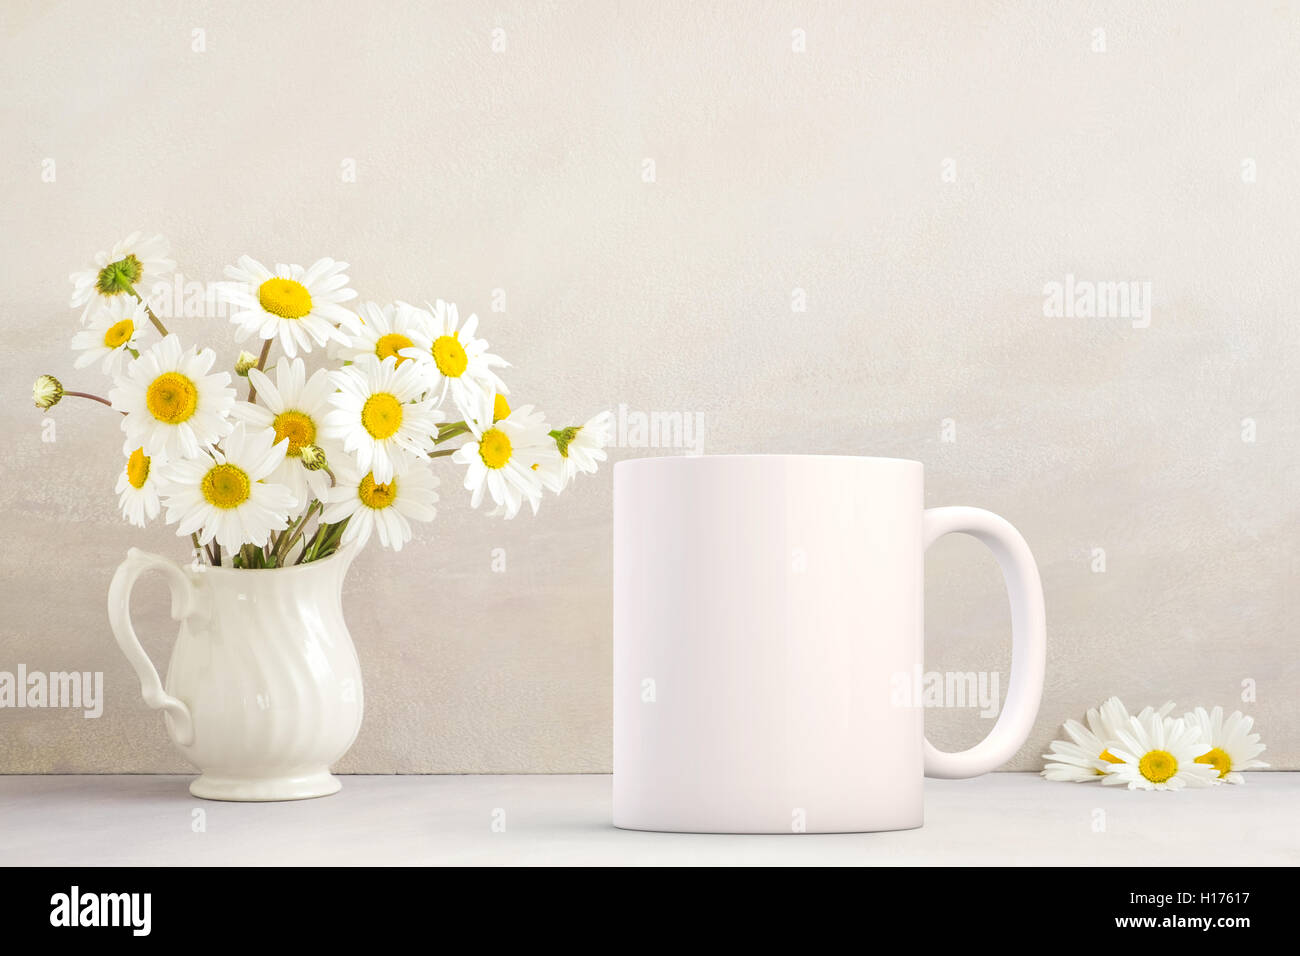 https://c8.alamy.com/comp/H17617/mockup-styled-stock-product-image-white-mug-that-you-can-add-your-H17617.jpg